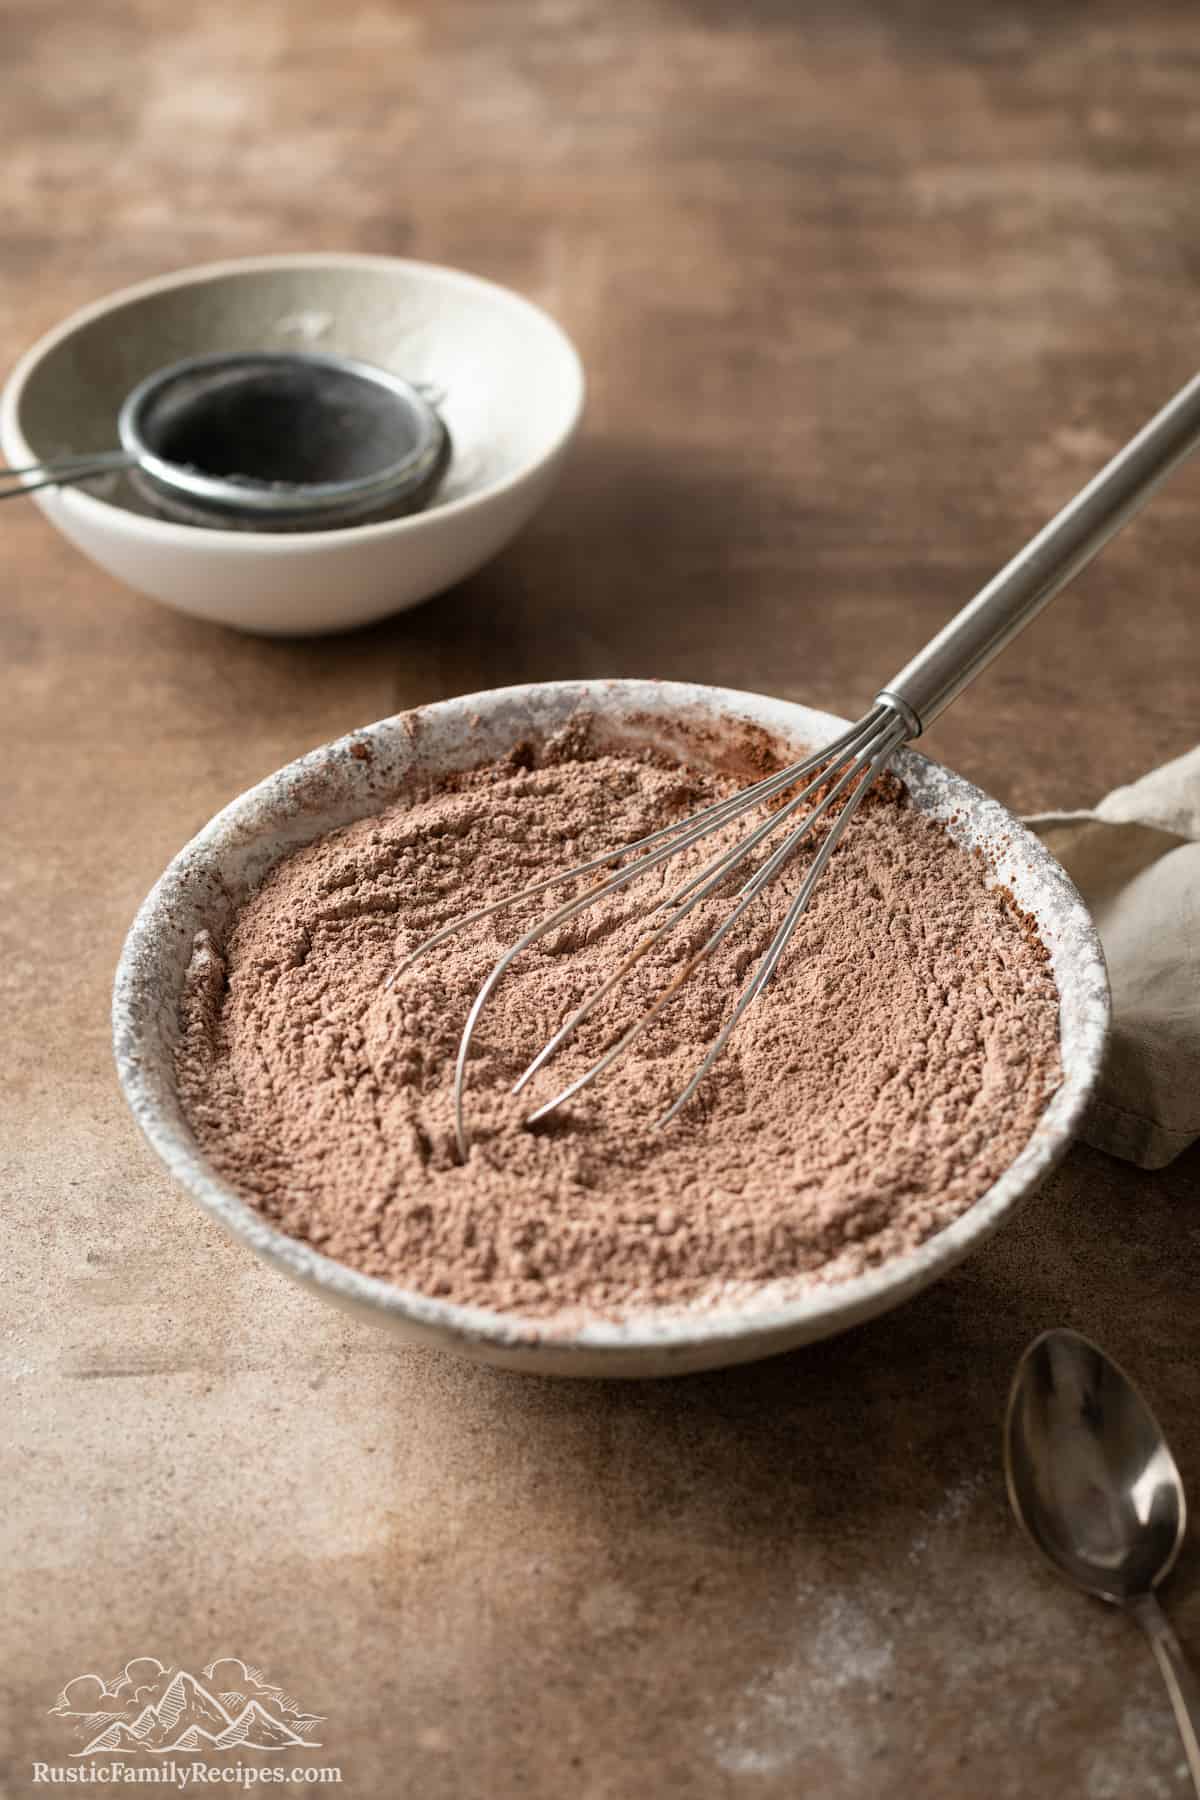 Flour, cocoa powder, and dry ingredients whisked together in a large bowl, with a sift in a small bowl in the background.